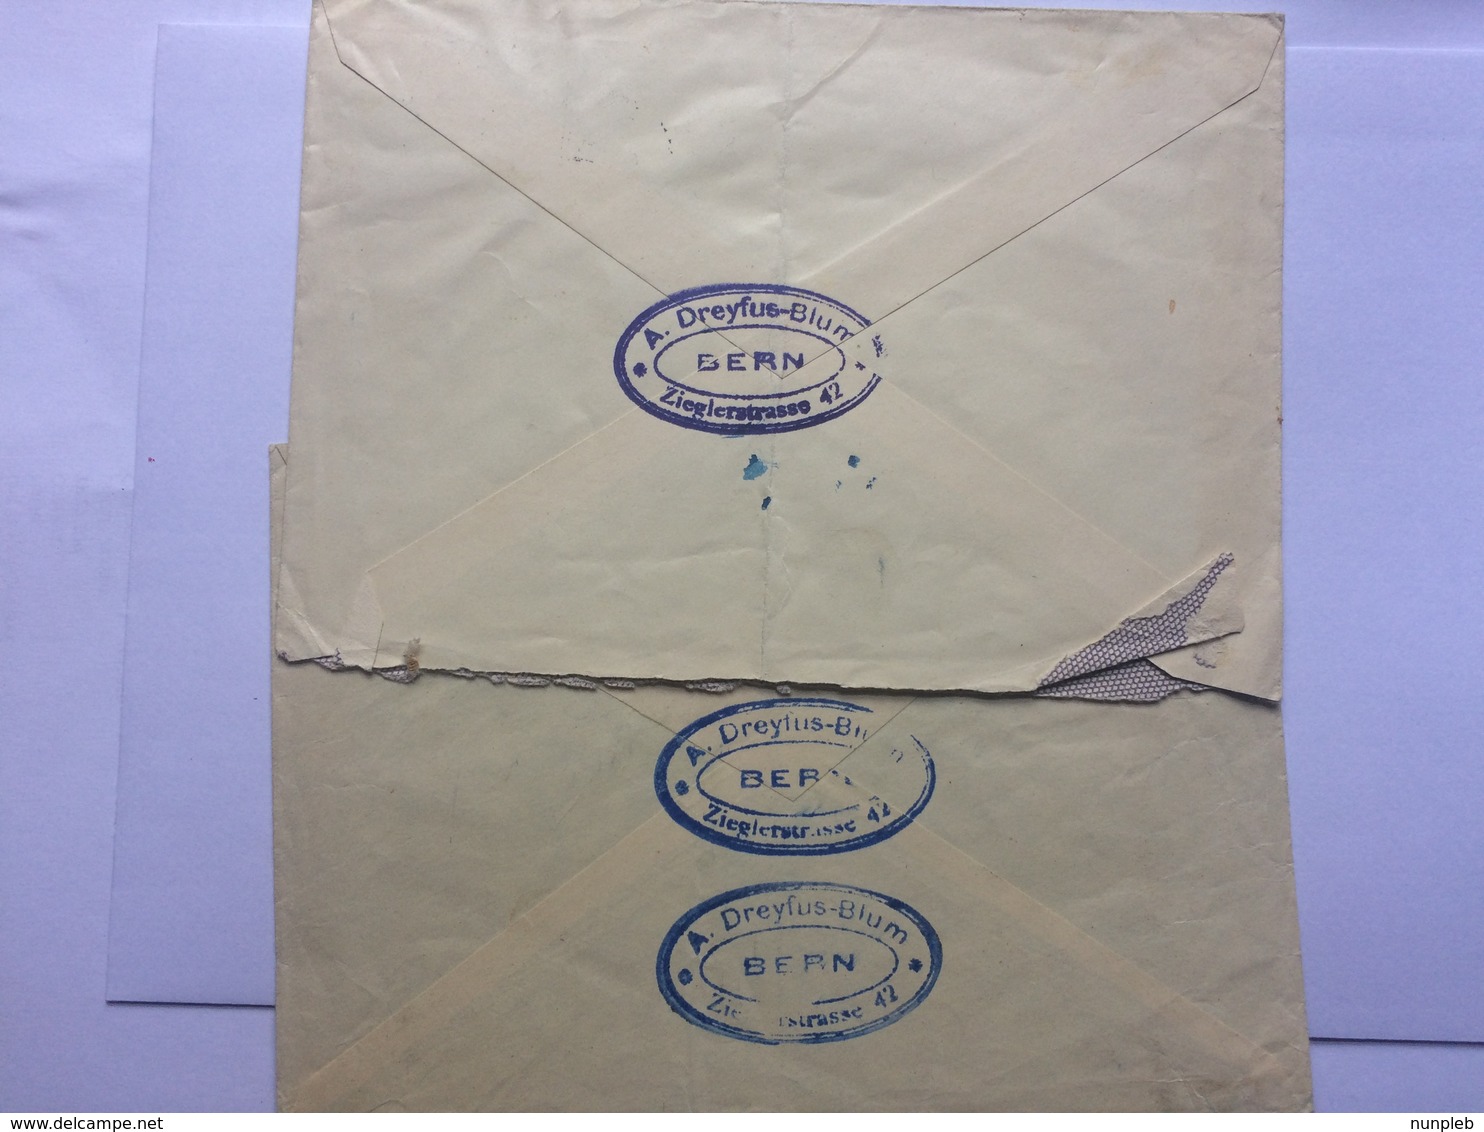 SWITZERLAND 1958 X 2 Covers Tied With Pro Patria 1952 Stamps One With Zivilschutz Slogan Postmark To Paris And Burgdorf - Covers & Documents